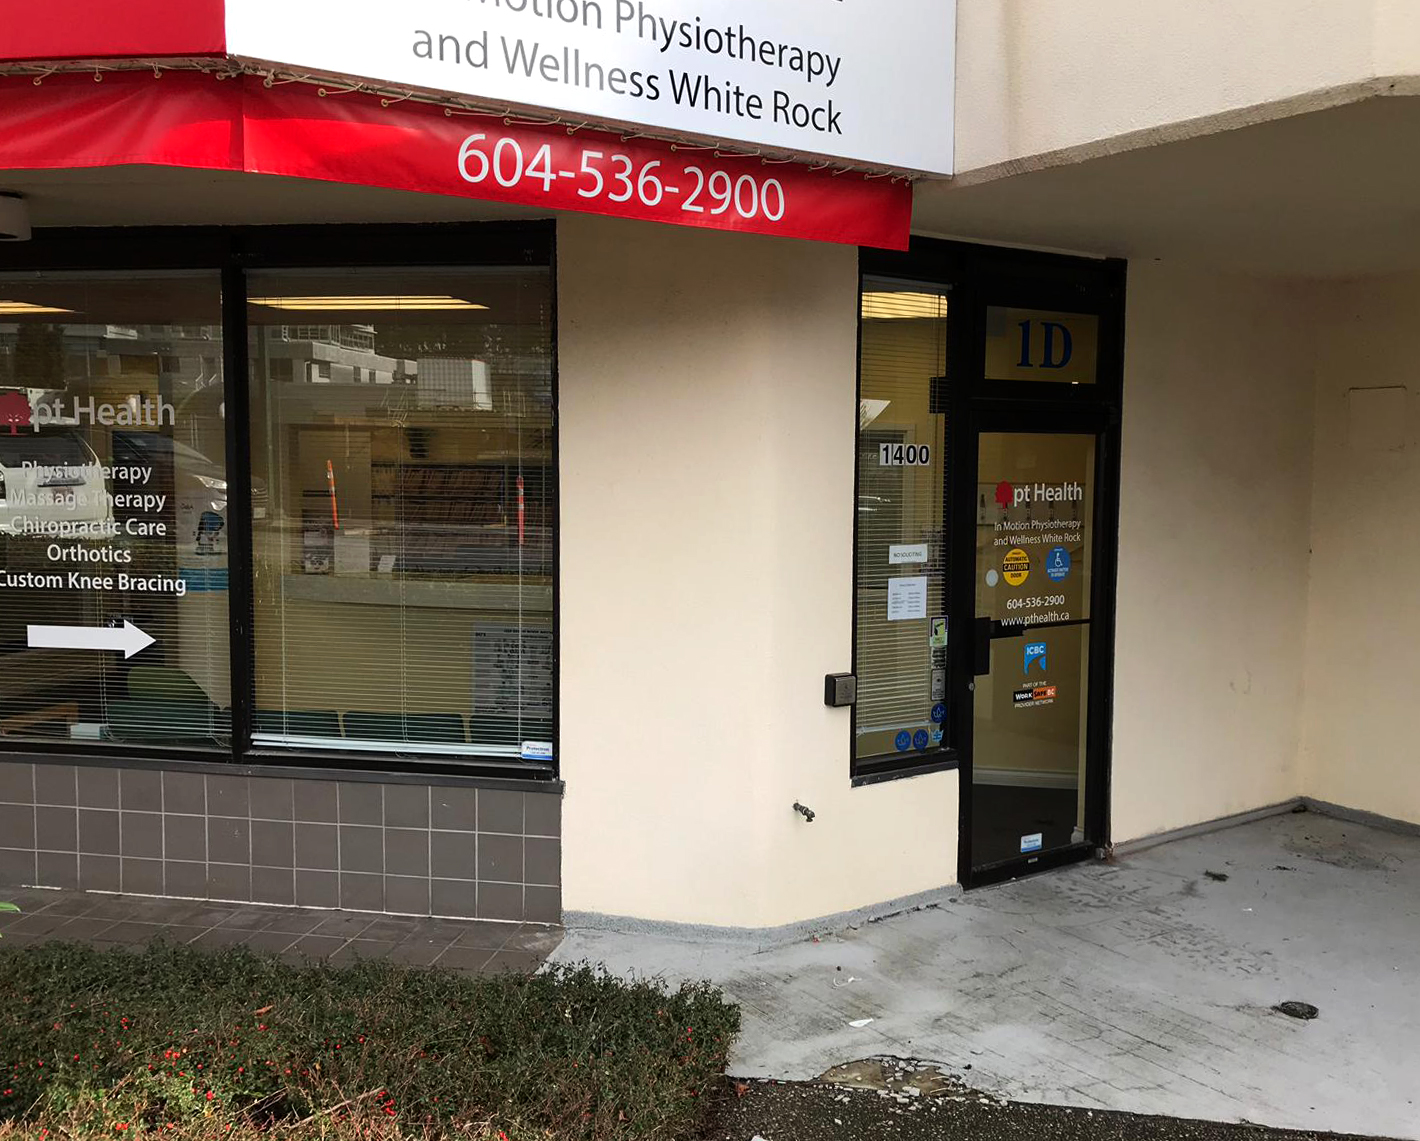 pt health in motion physiotherapy and wellness white rock entrance